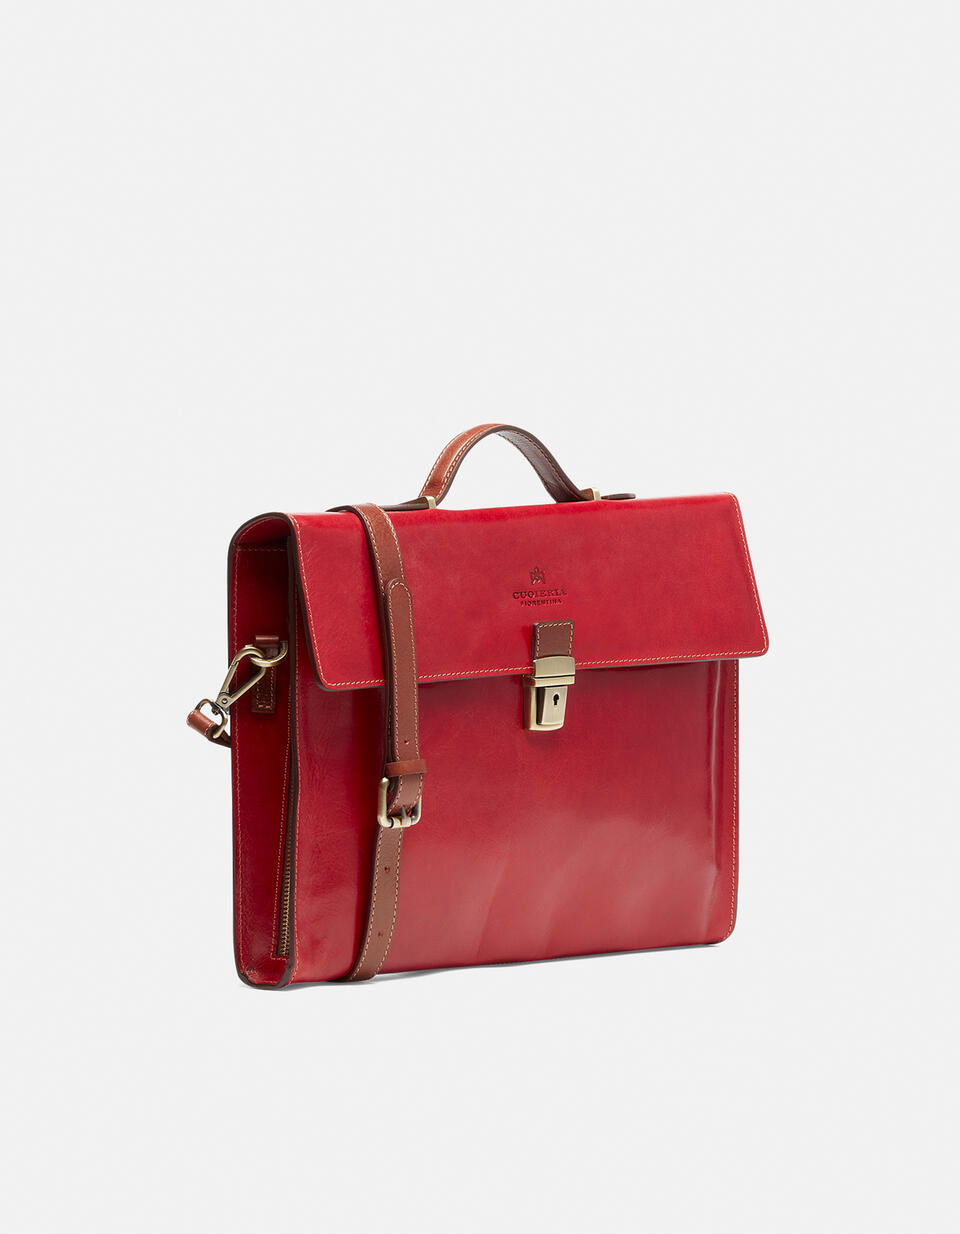 Warm and Colour leather briefcase with side zips - Briefcases and Laptop Bags | Briefcases  - Briefcases and Laptop Bags | BriefcasesCuoieria Fiorentina